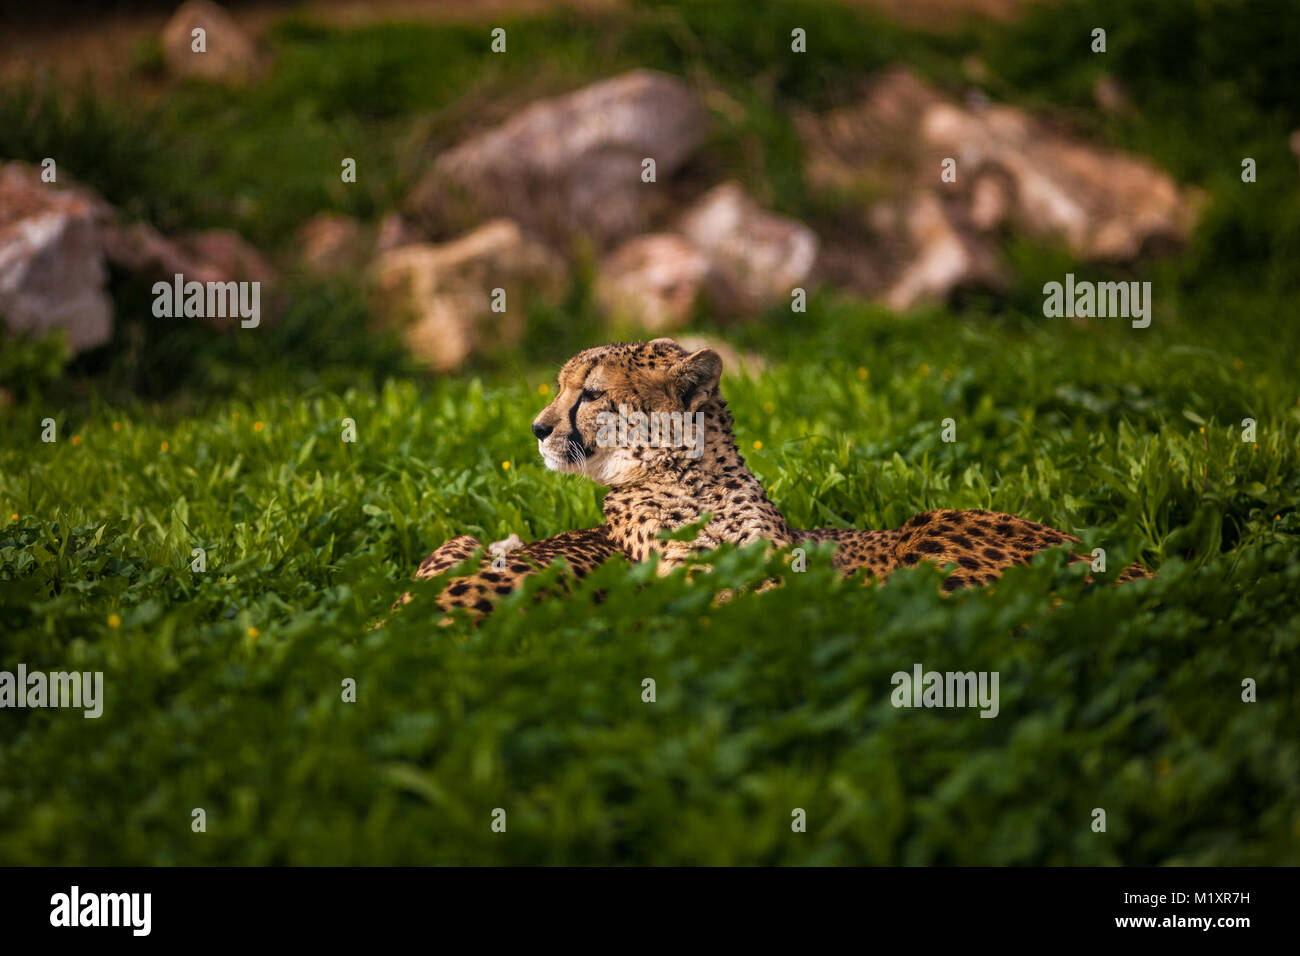 Two Beautiful Cheetah's Resting and Sunbathing on Green Grass Stock Photo